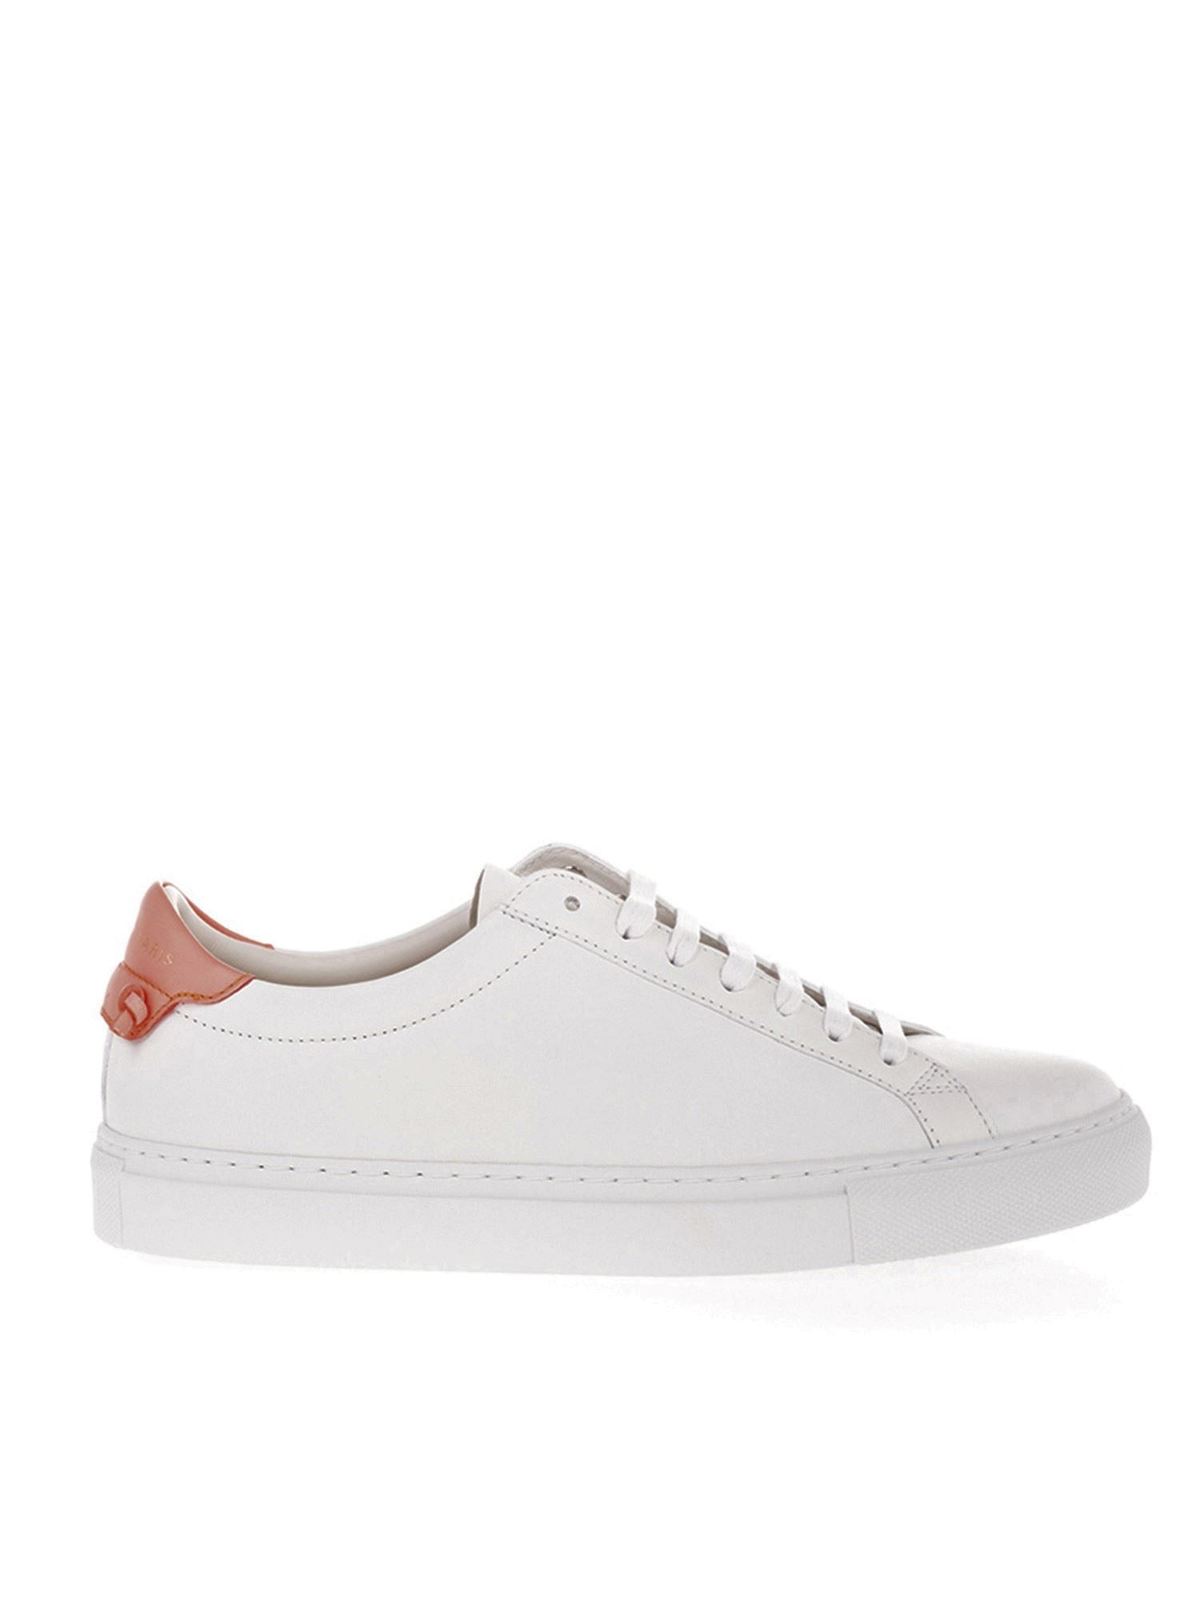 Trainers Givenchy - Urban Street sneakers in white and pink - BE0003E0TW652